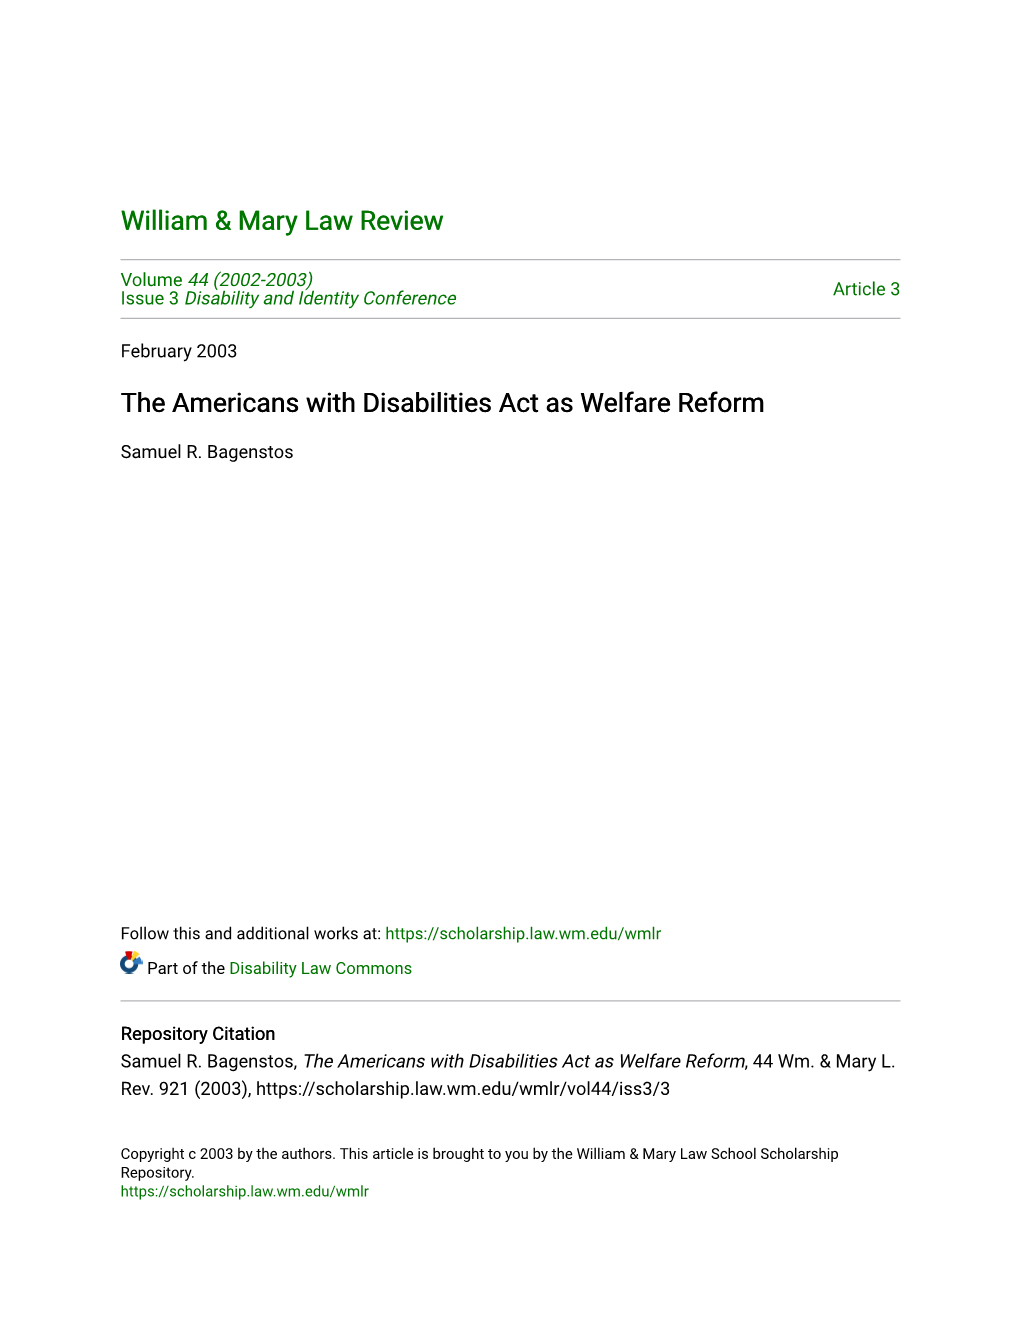 The Americans with Disabilities Act As Welfare Reform